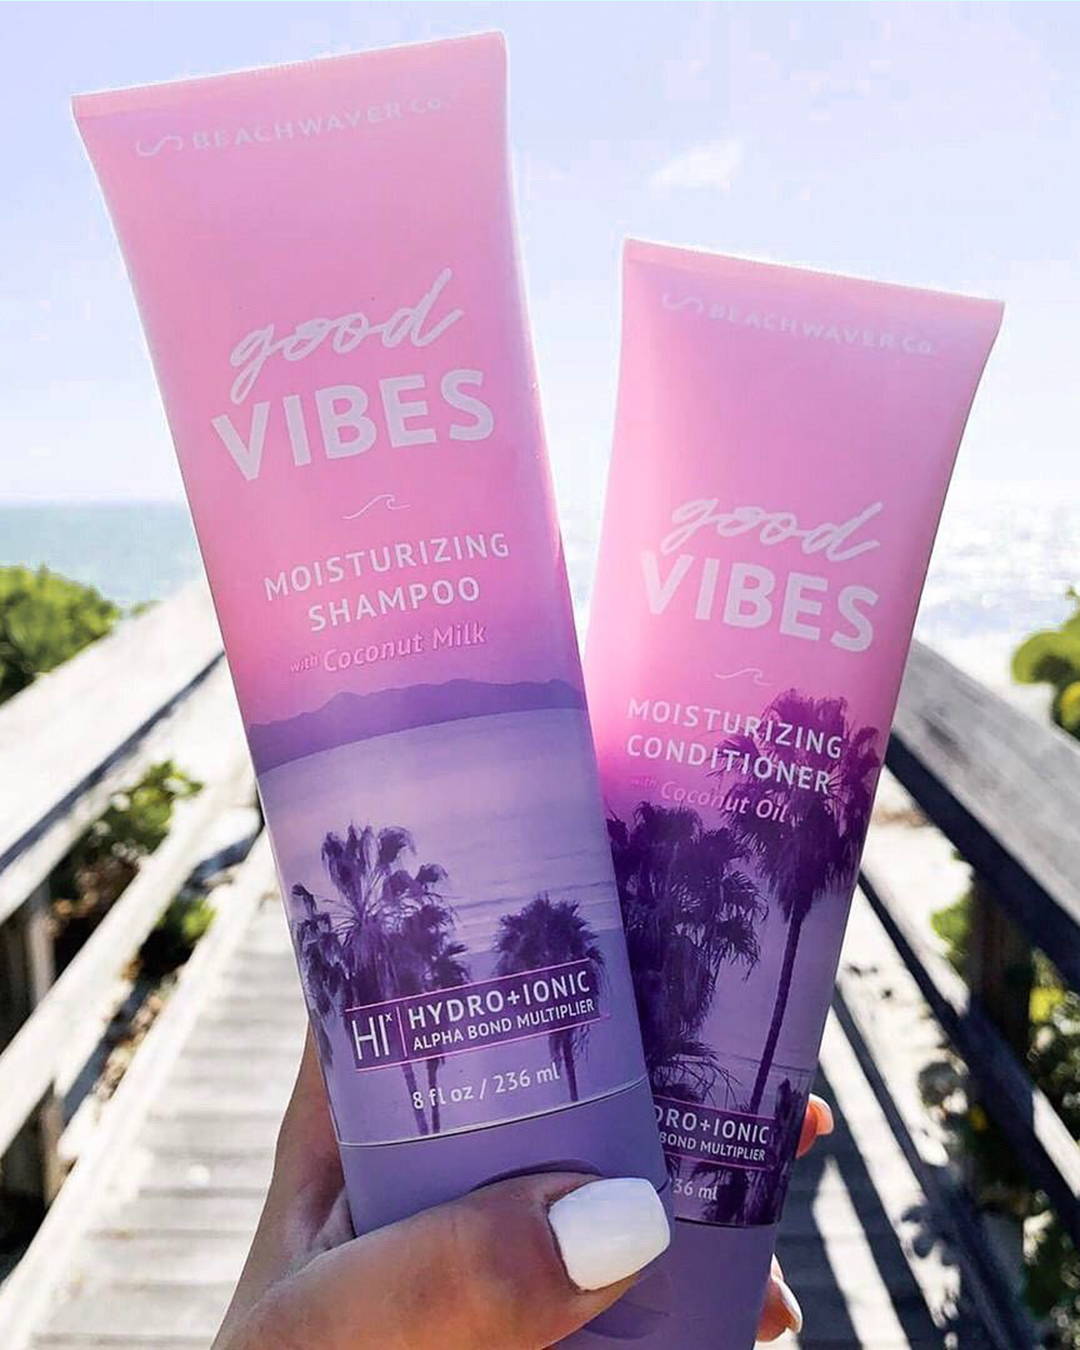 Image of Good Vibes shampoo and conditioner photographed on a dock